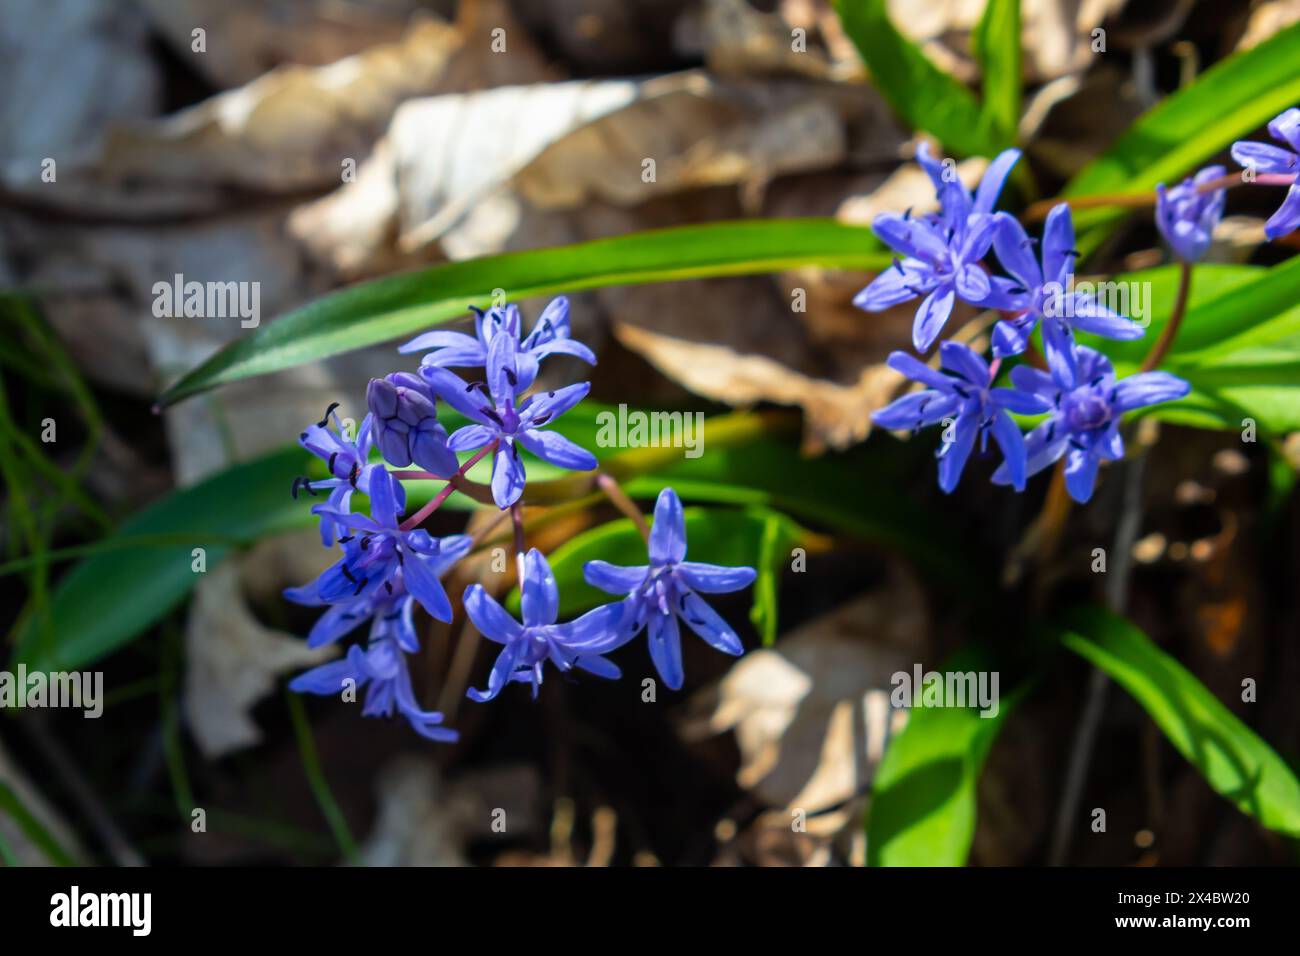 Scilla bifolia, the alpine squill or two-leaf squill, is a herbaceous perennial plant of the family Asparagaceae. Art photo of the early flowering pla Stock Photo